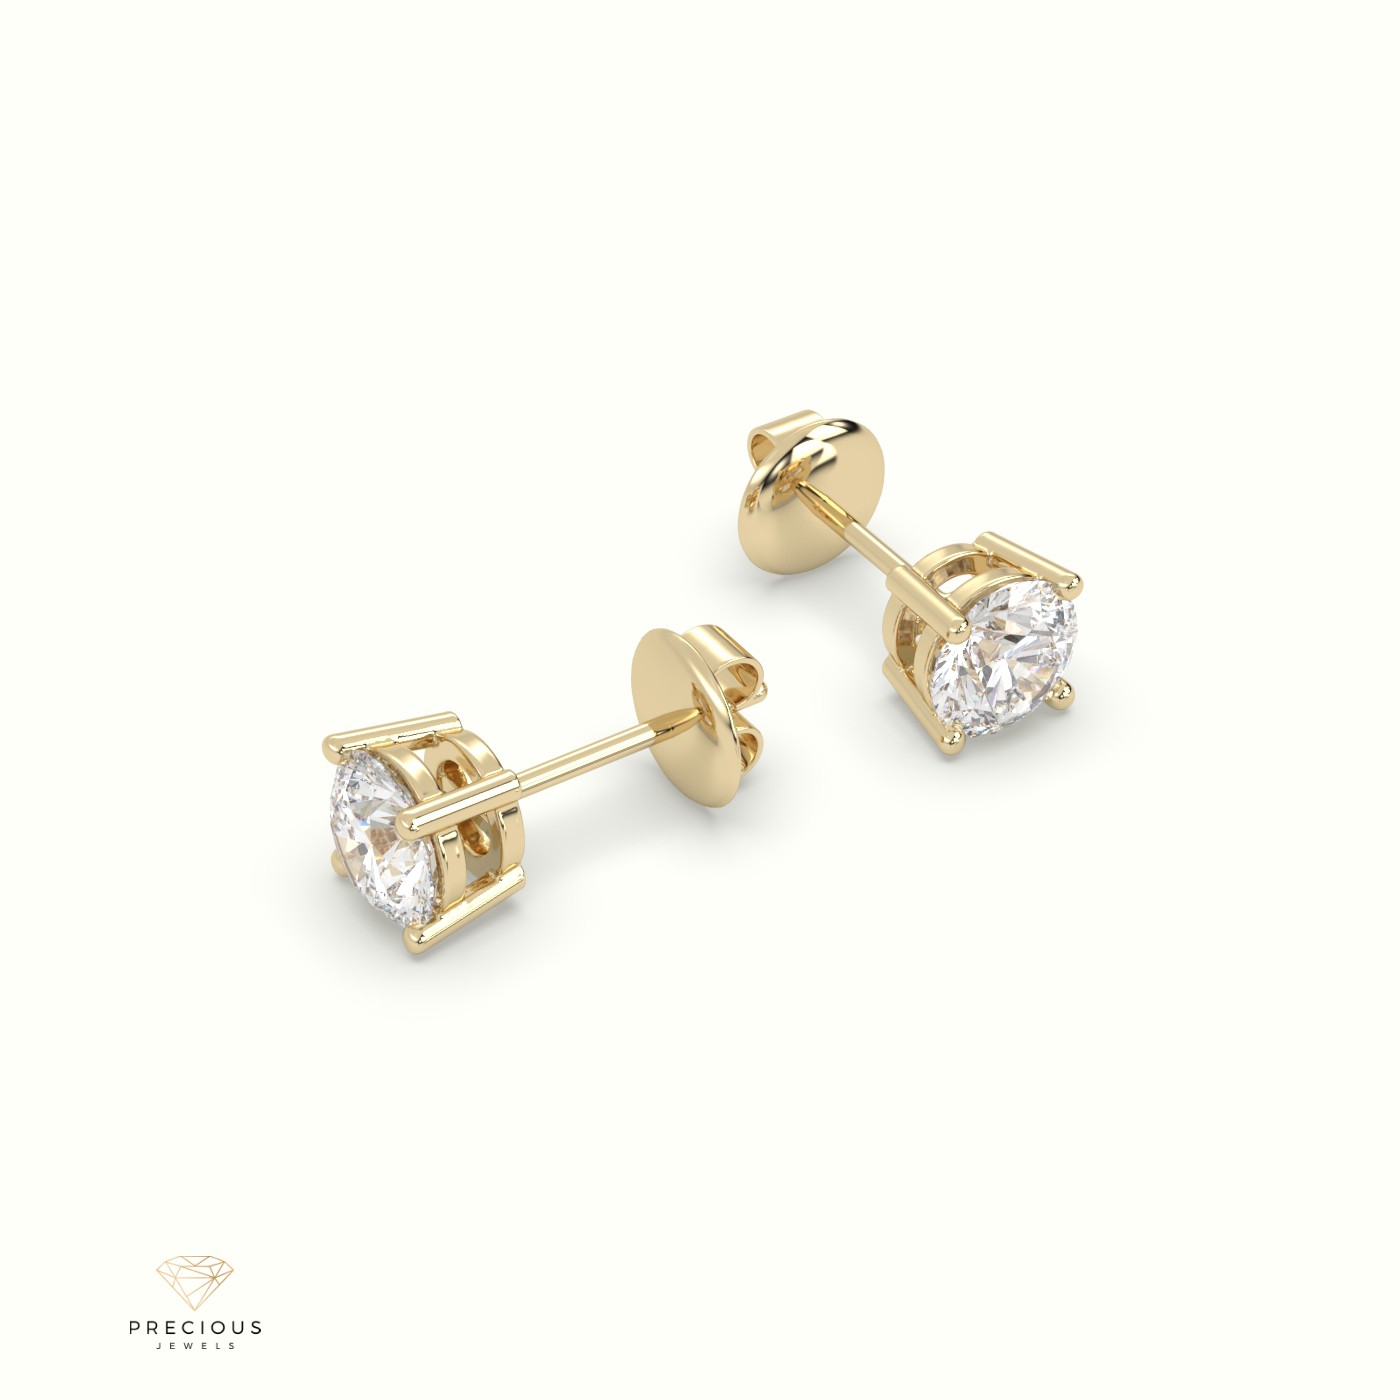 18k yellow gold 4 prongs classic round diamond earring studs Photos & images